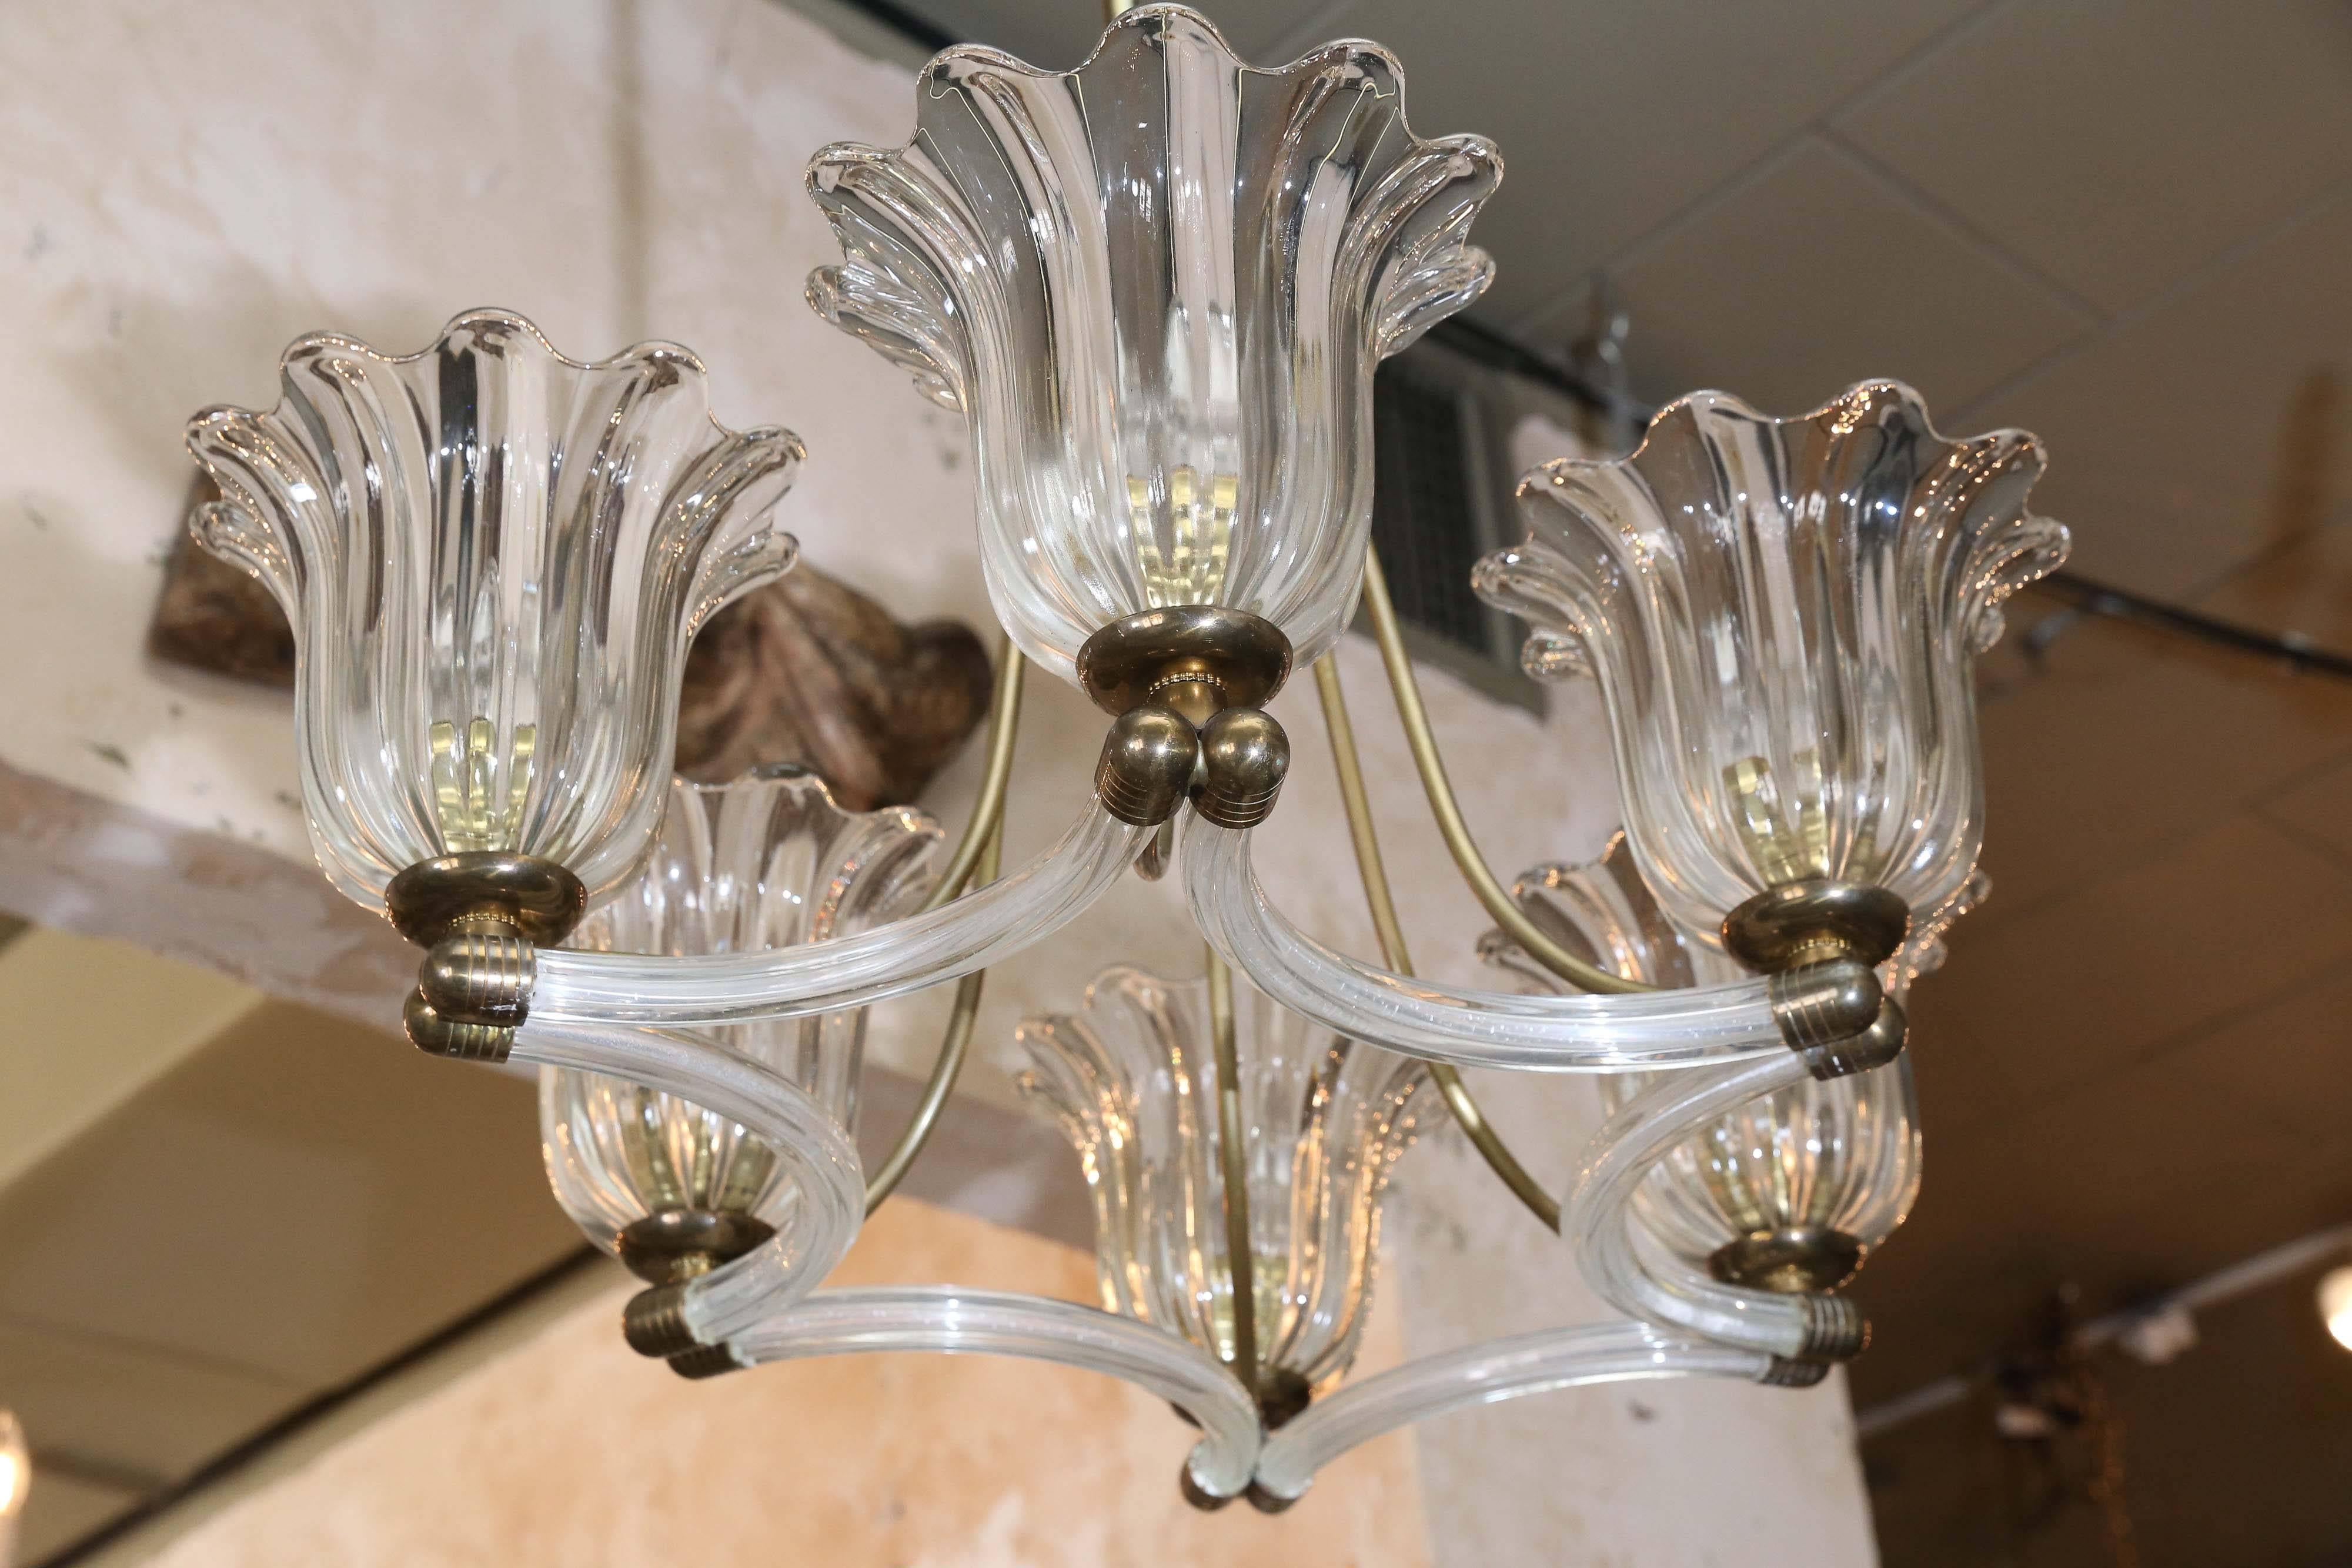 Murano chandelier by Seguso Vetri d'Arte, circa 1940. Blown glass with bronze details. Has been wired for the US.